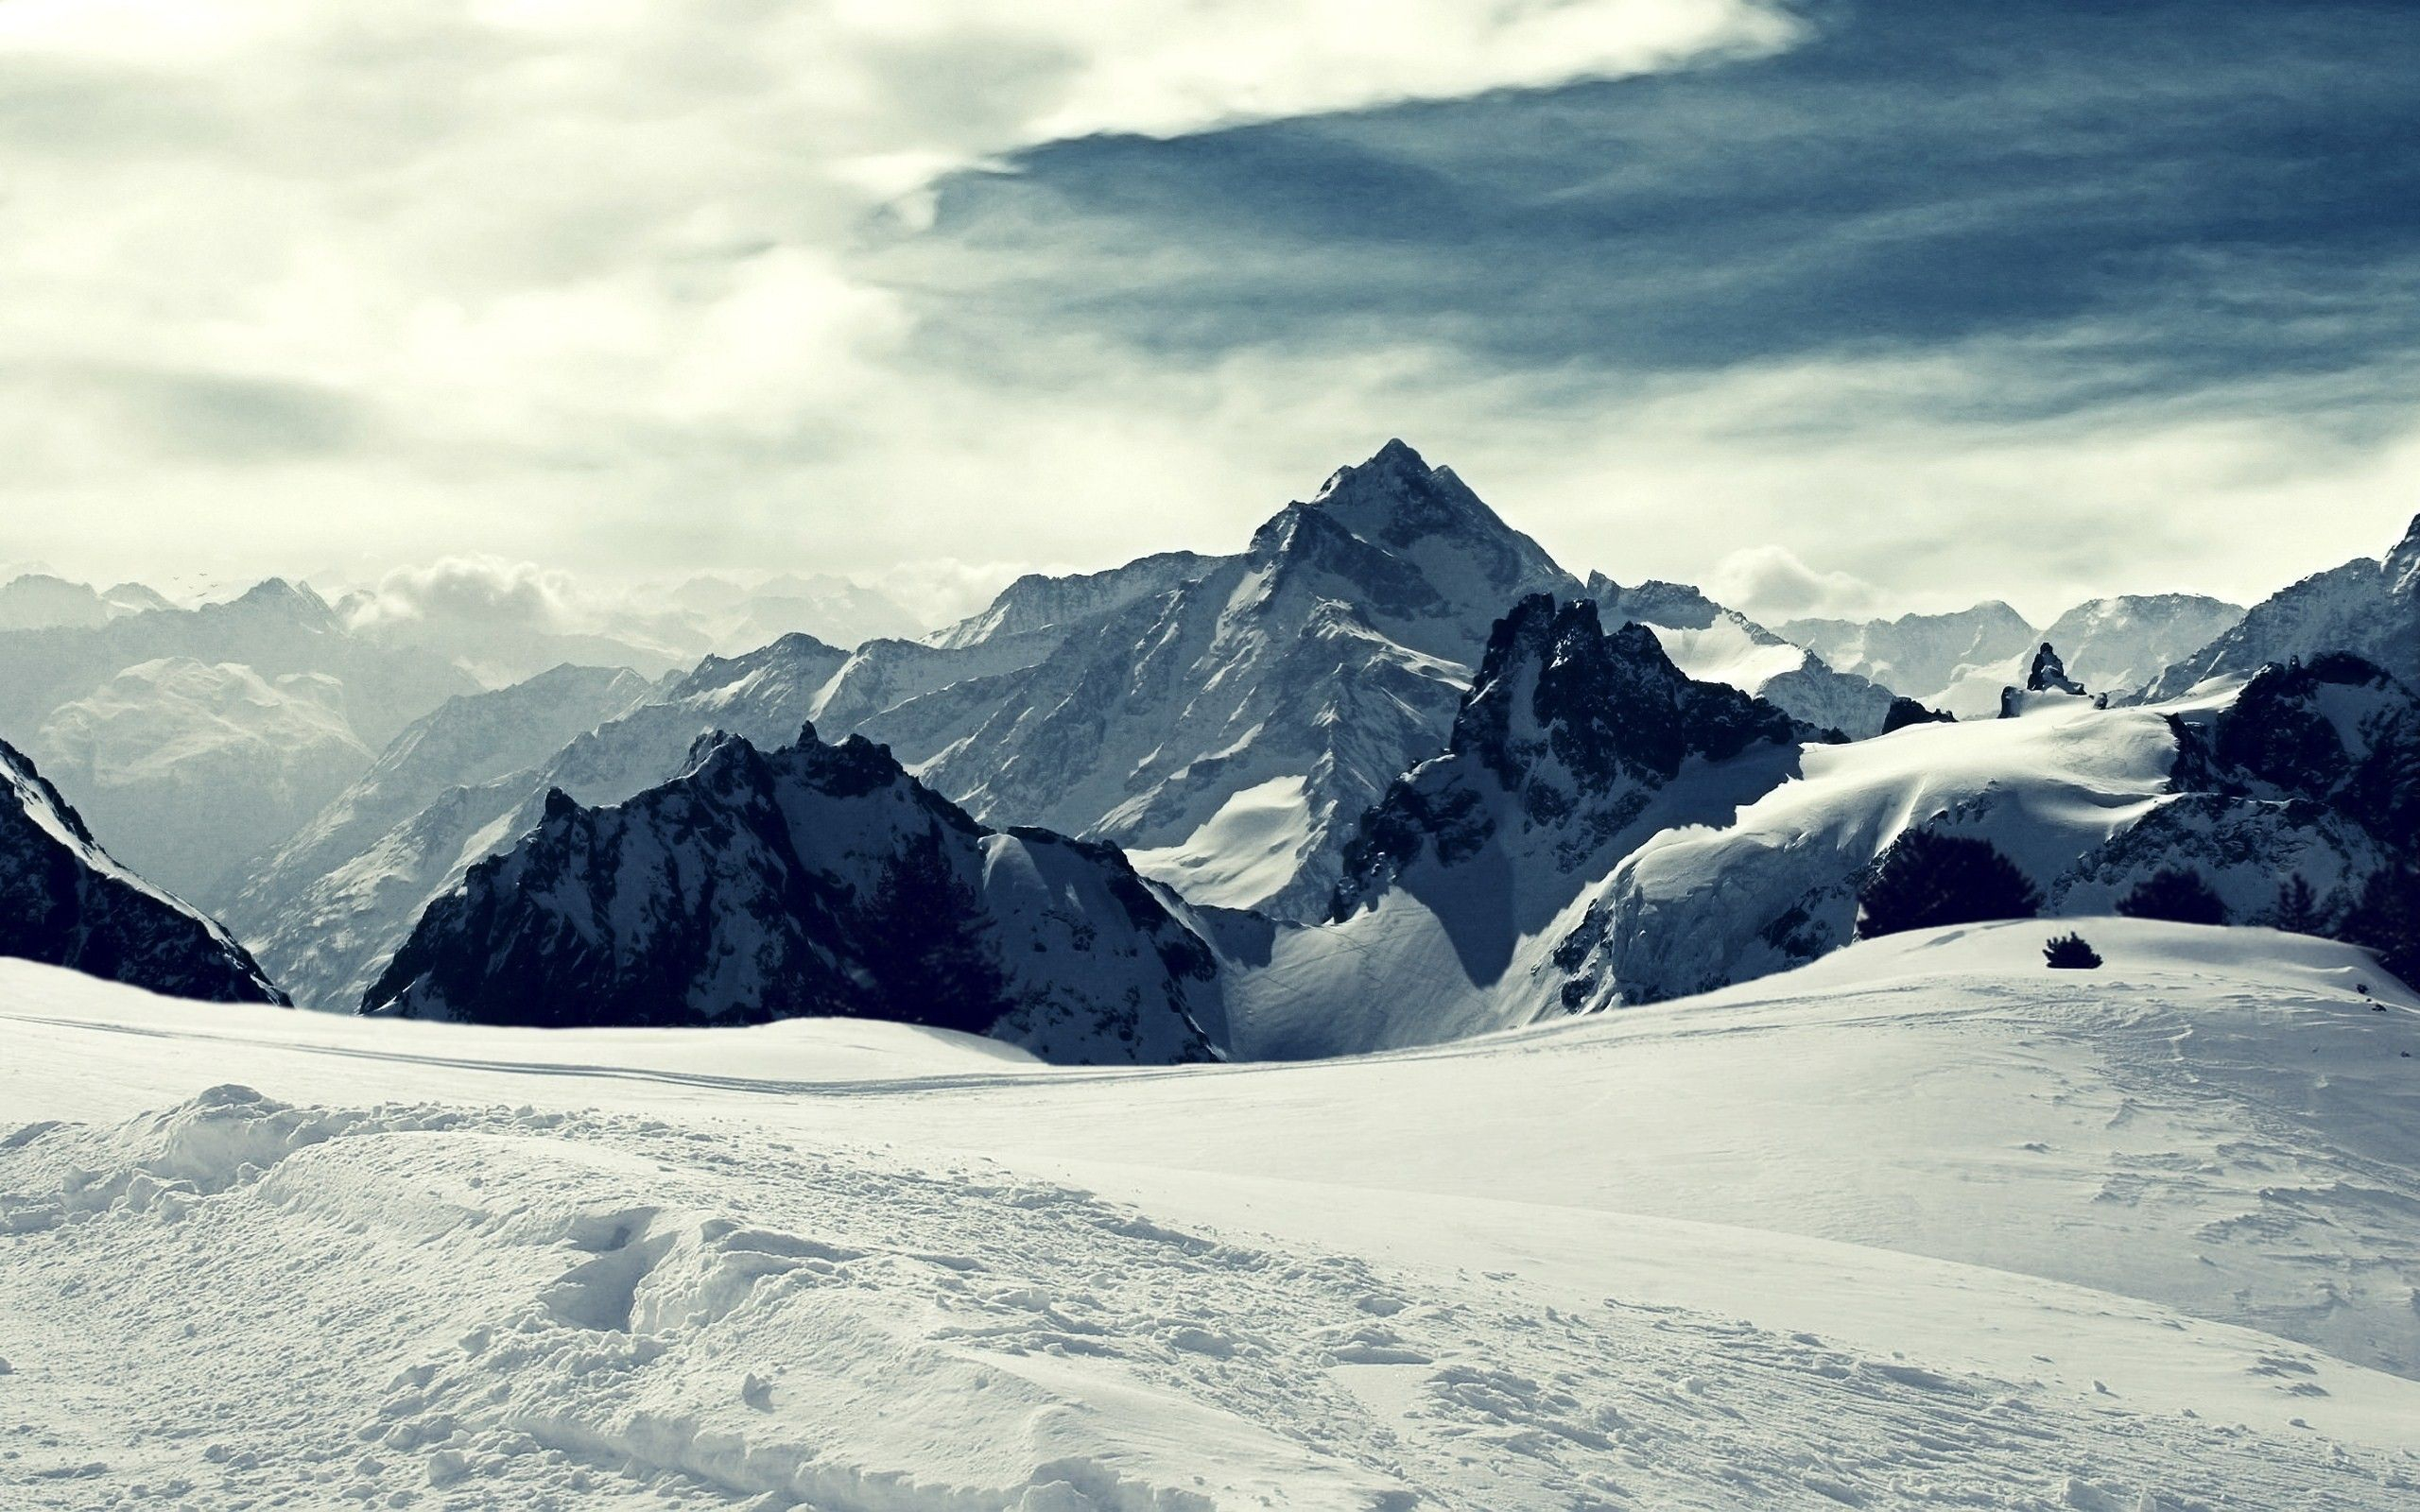 Windows Snowy Mountain Wallpapers and Backgrounds 4K, HD, Dual Screen